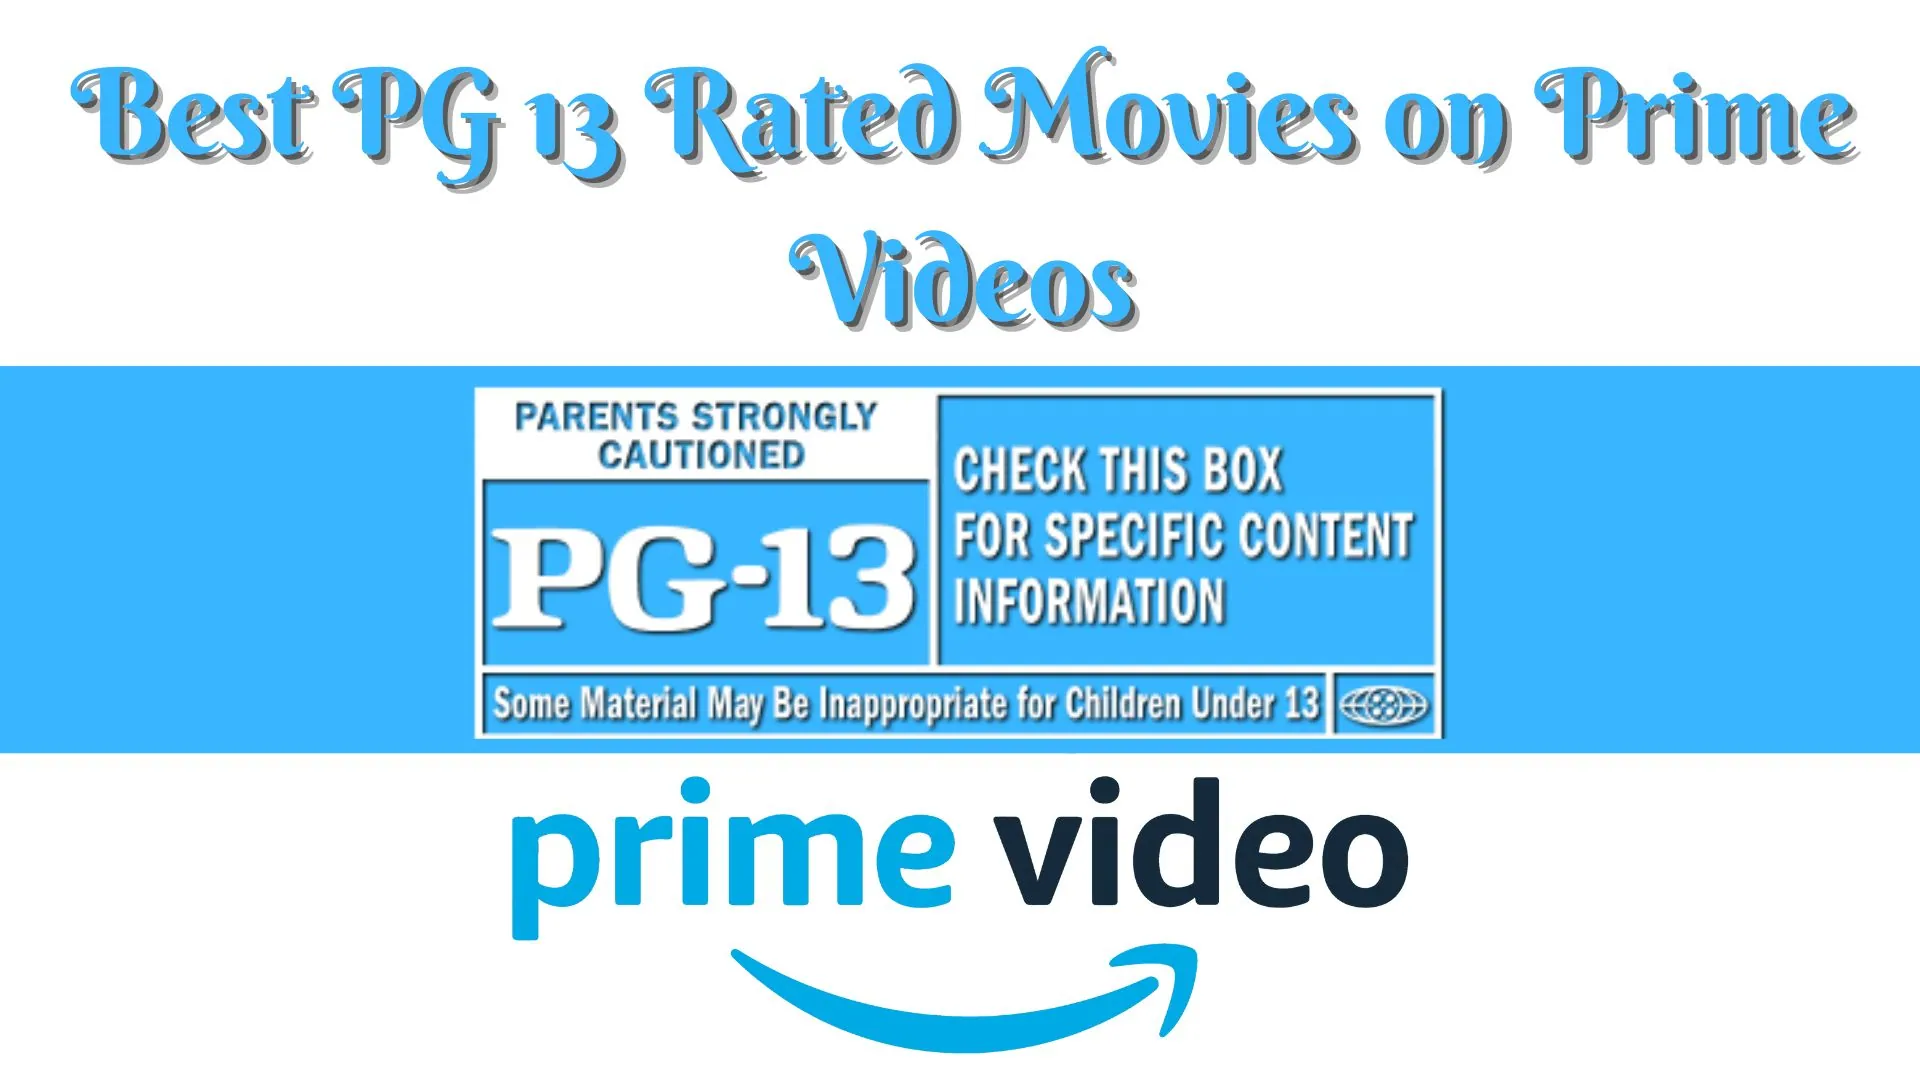 Best PG 13 Rated Movies on Prime Videos